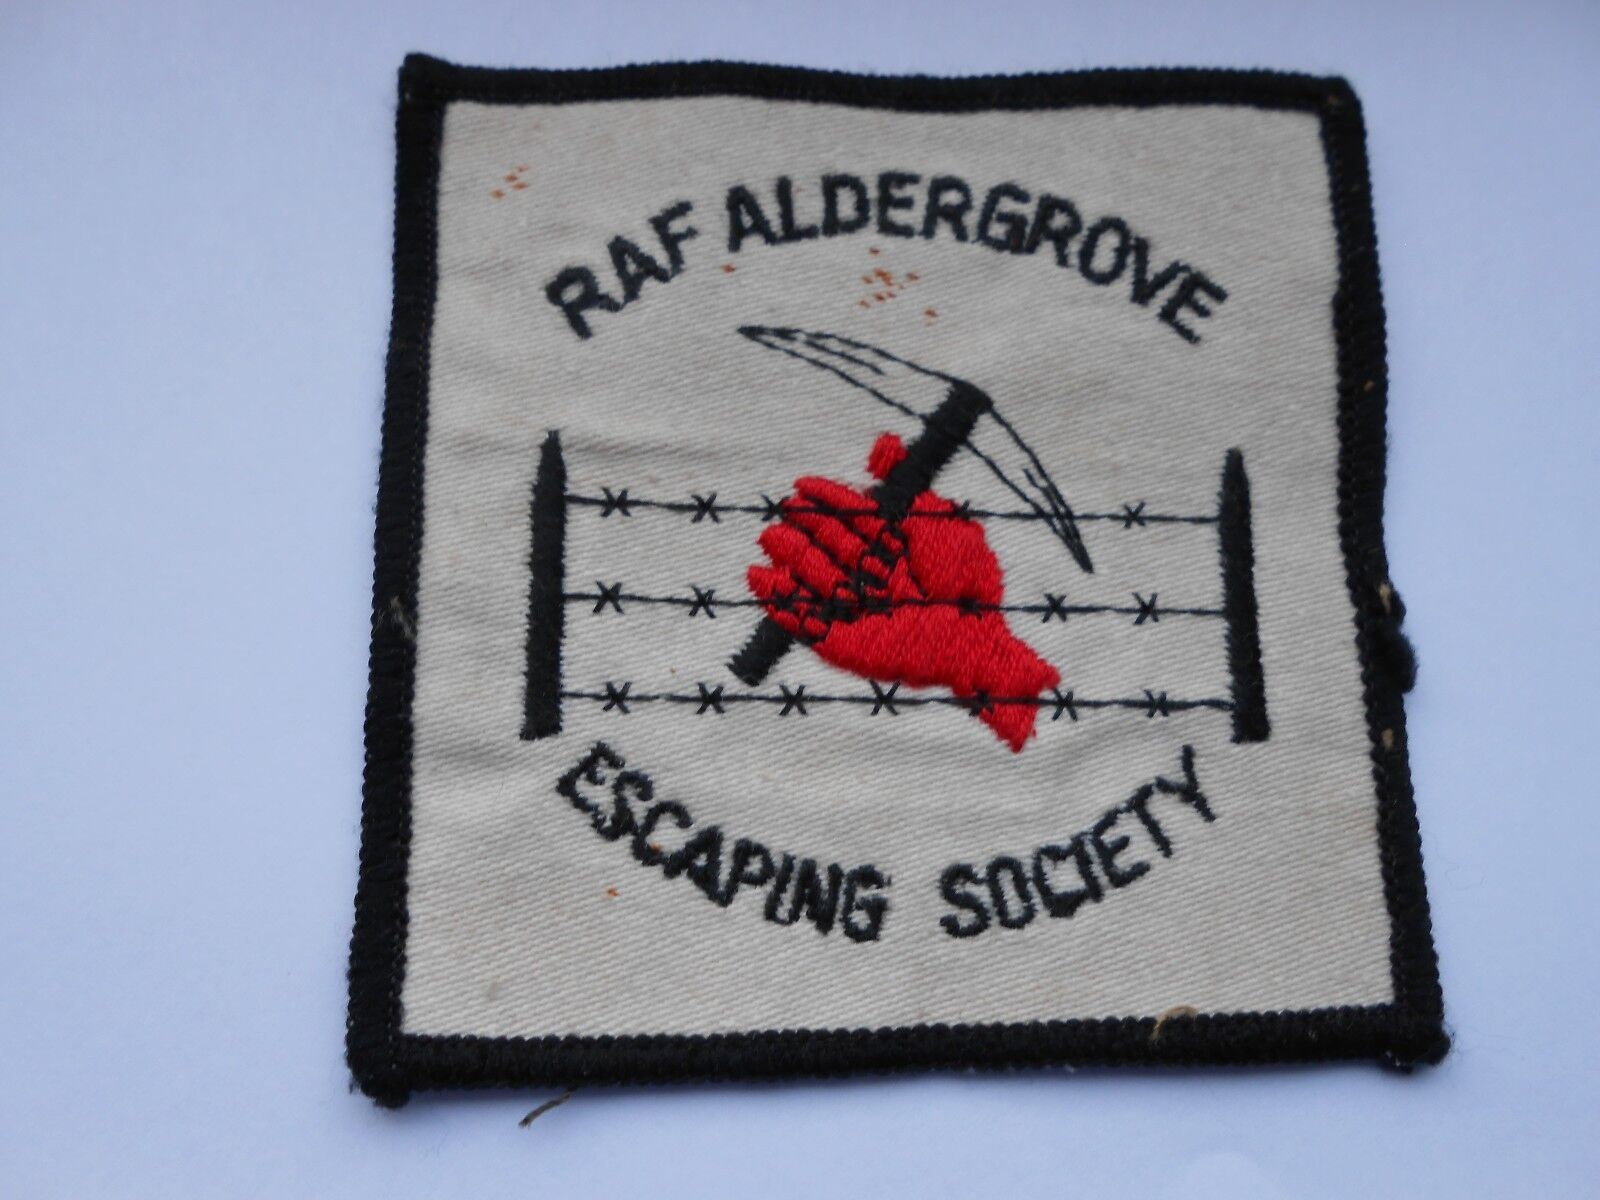 Northern Ireland  troubles RAF ALDERGROVE ESCAPING SOCIETY members cloth patch 